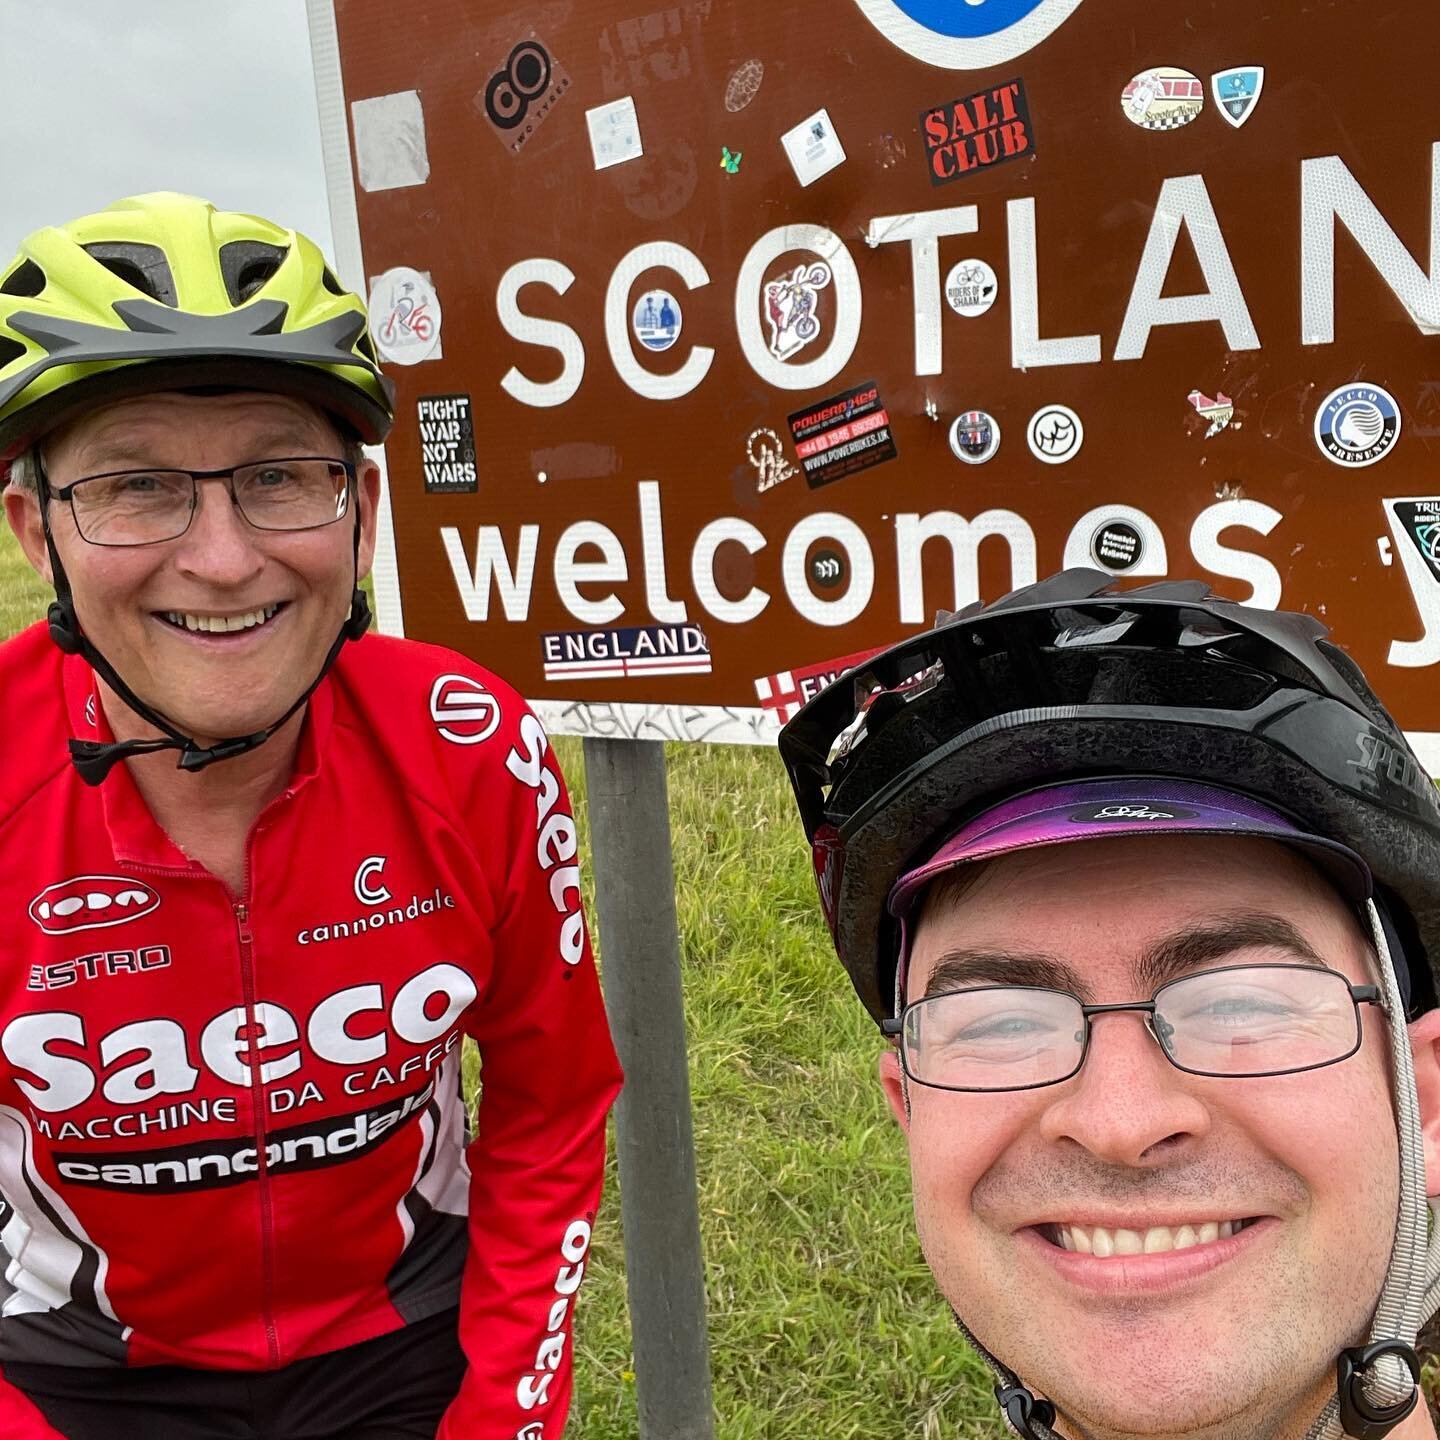 We made it to Scotland! Scotland itself is ridiculously huge, so it&rsquo;s going to take us another week to complete the trip, but finally going over the border this morning was amazing and the rest of the trip was like cycling through Windows XP

#